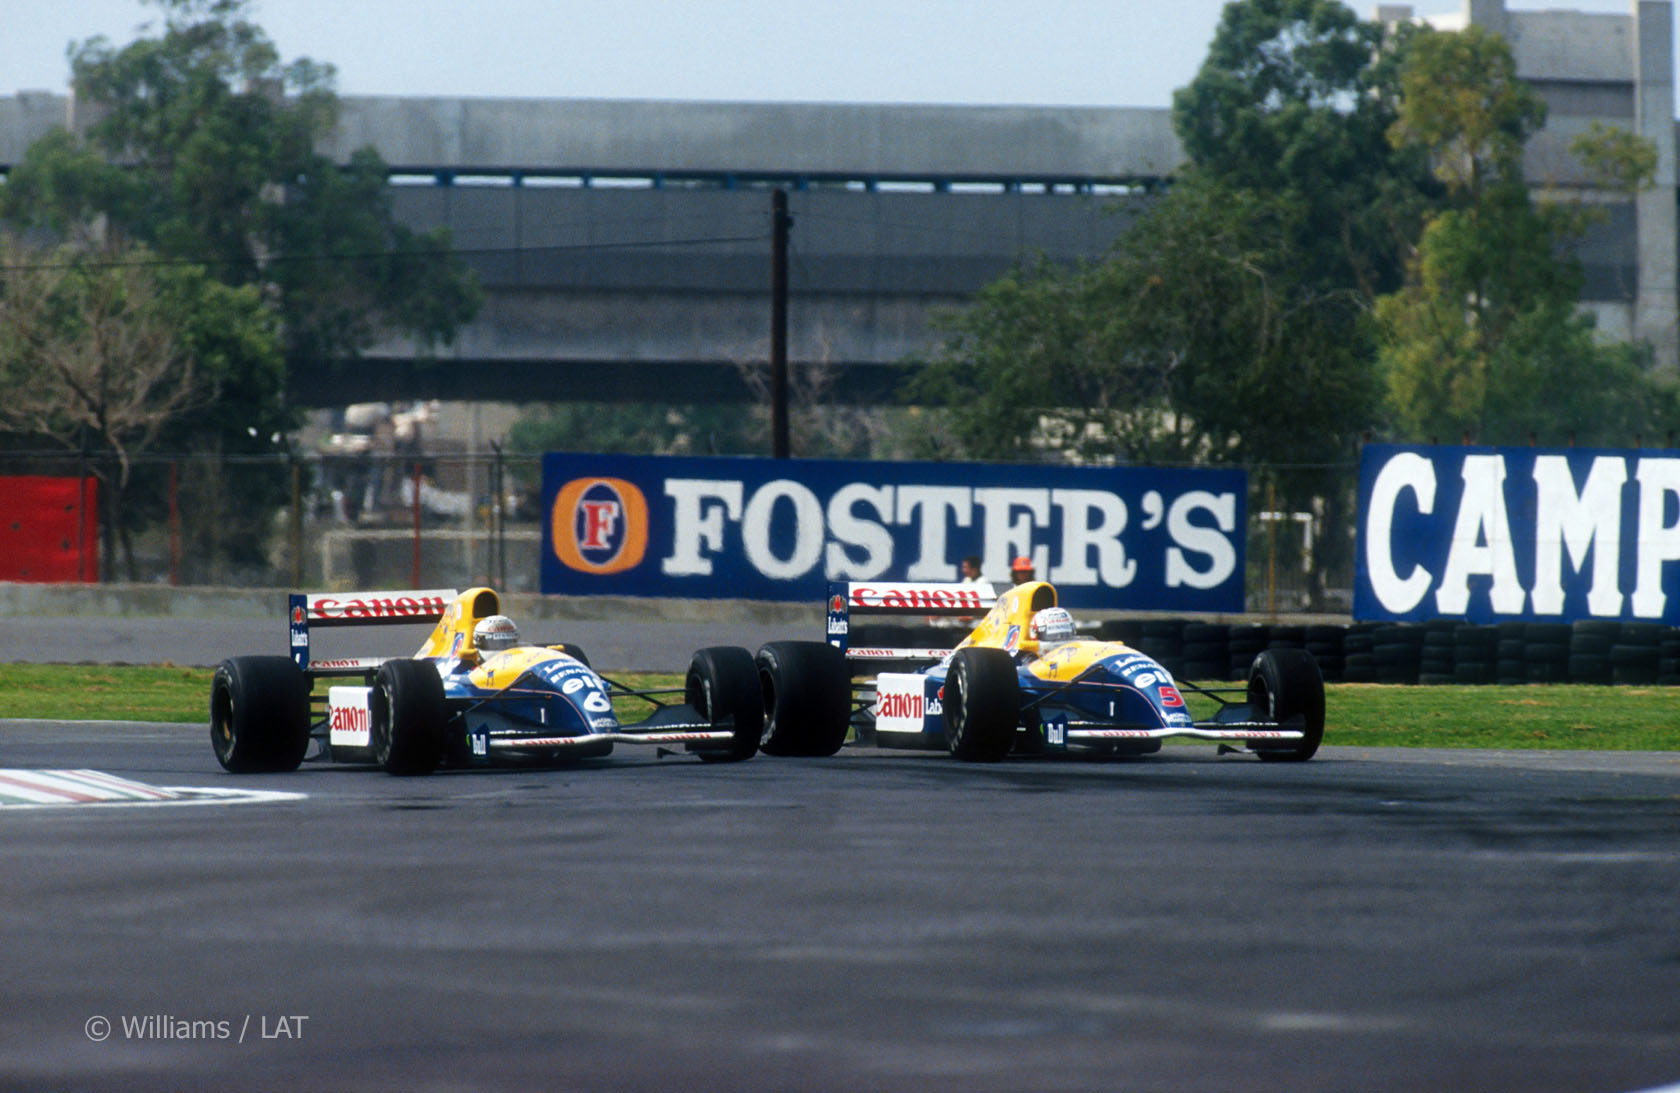 fastback gp messico 1991 patrese mansell